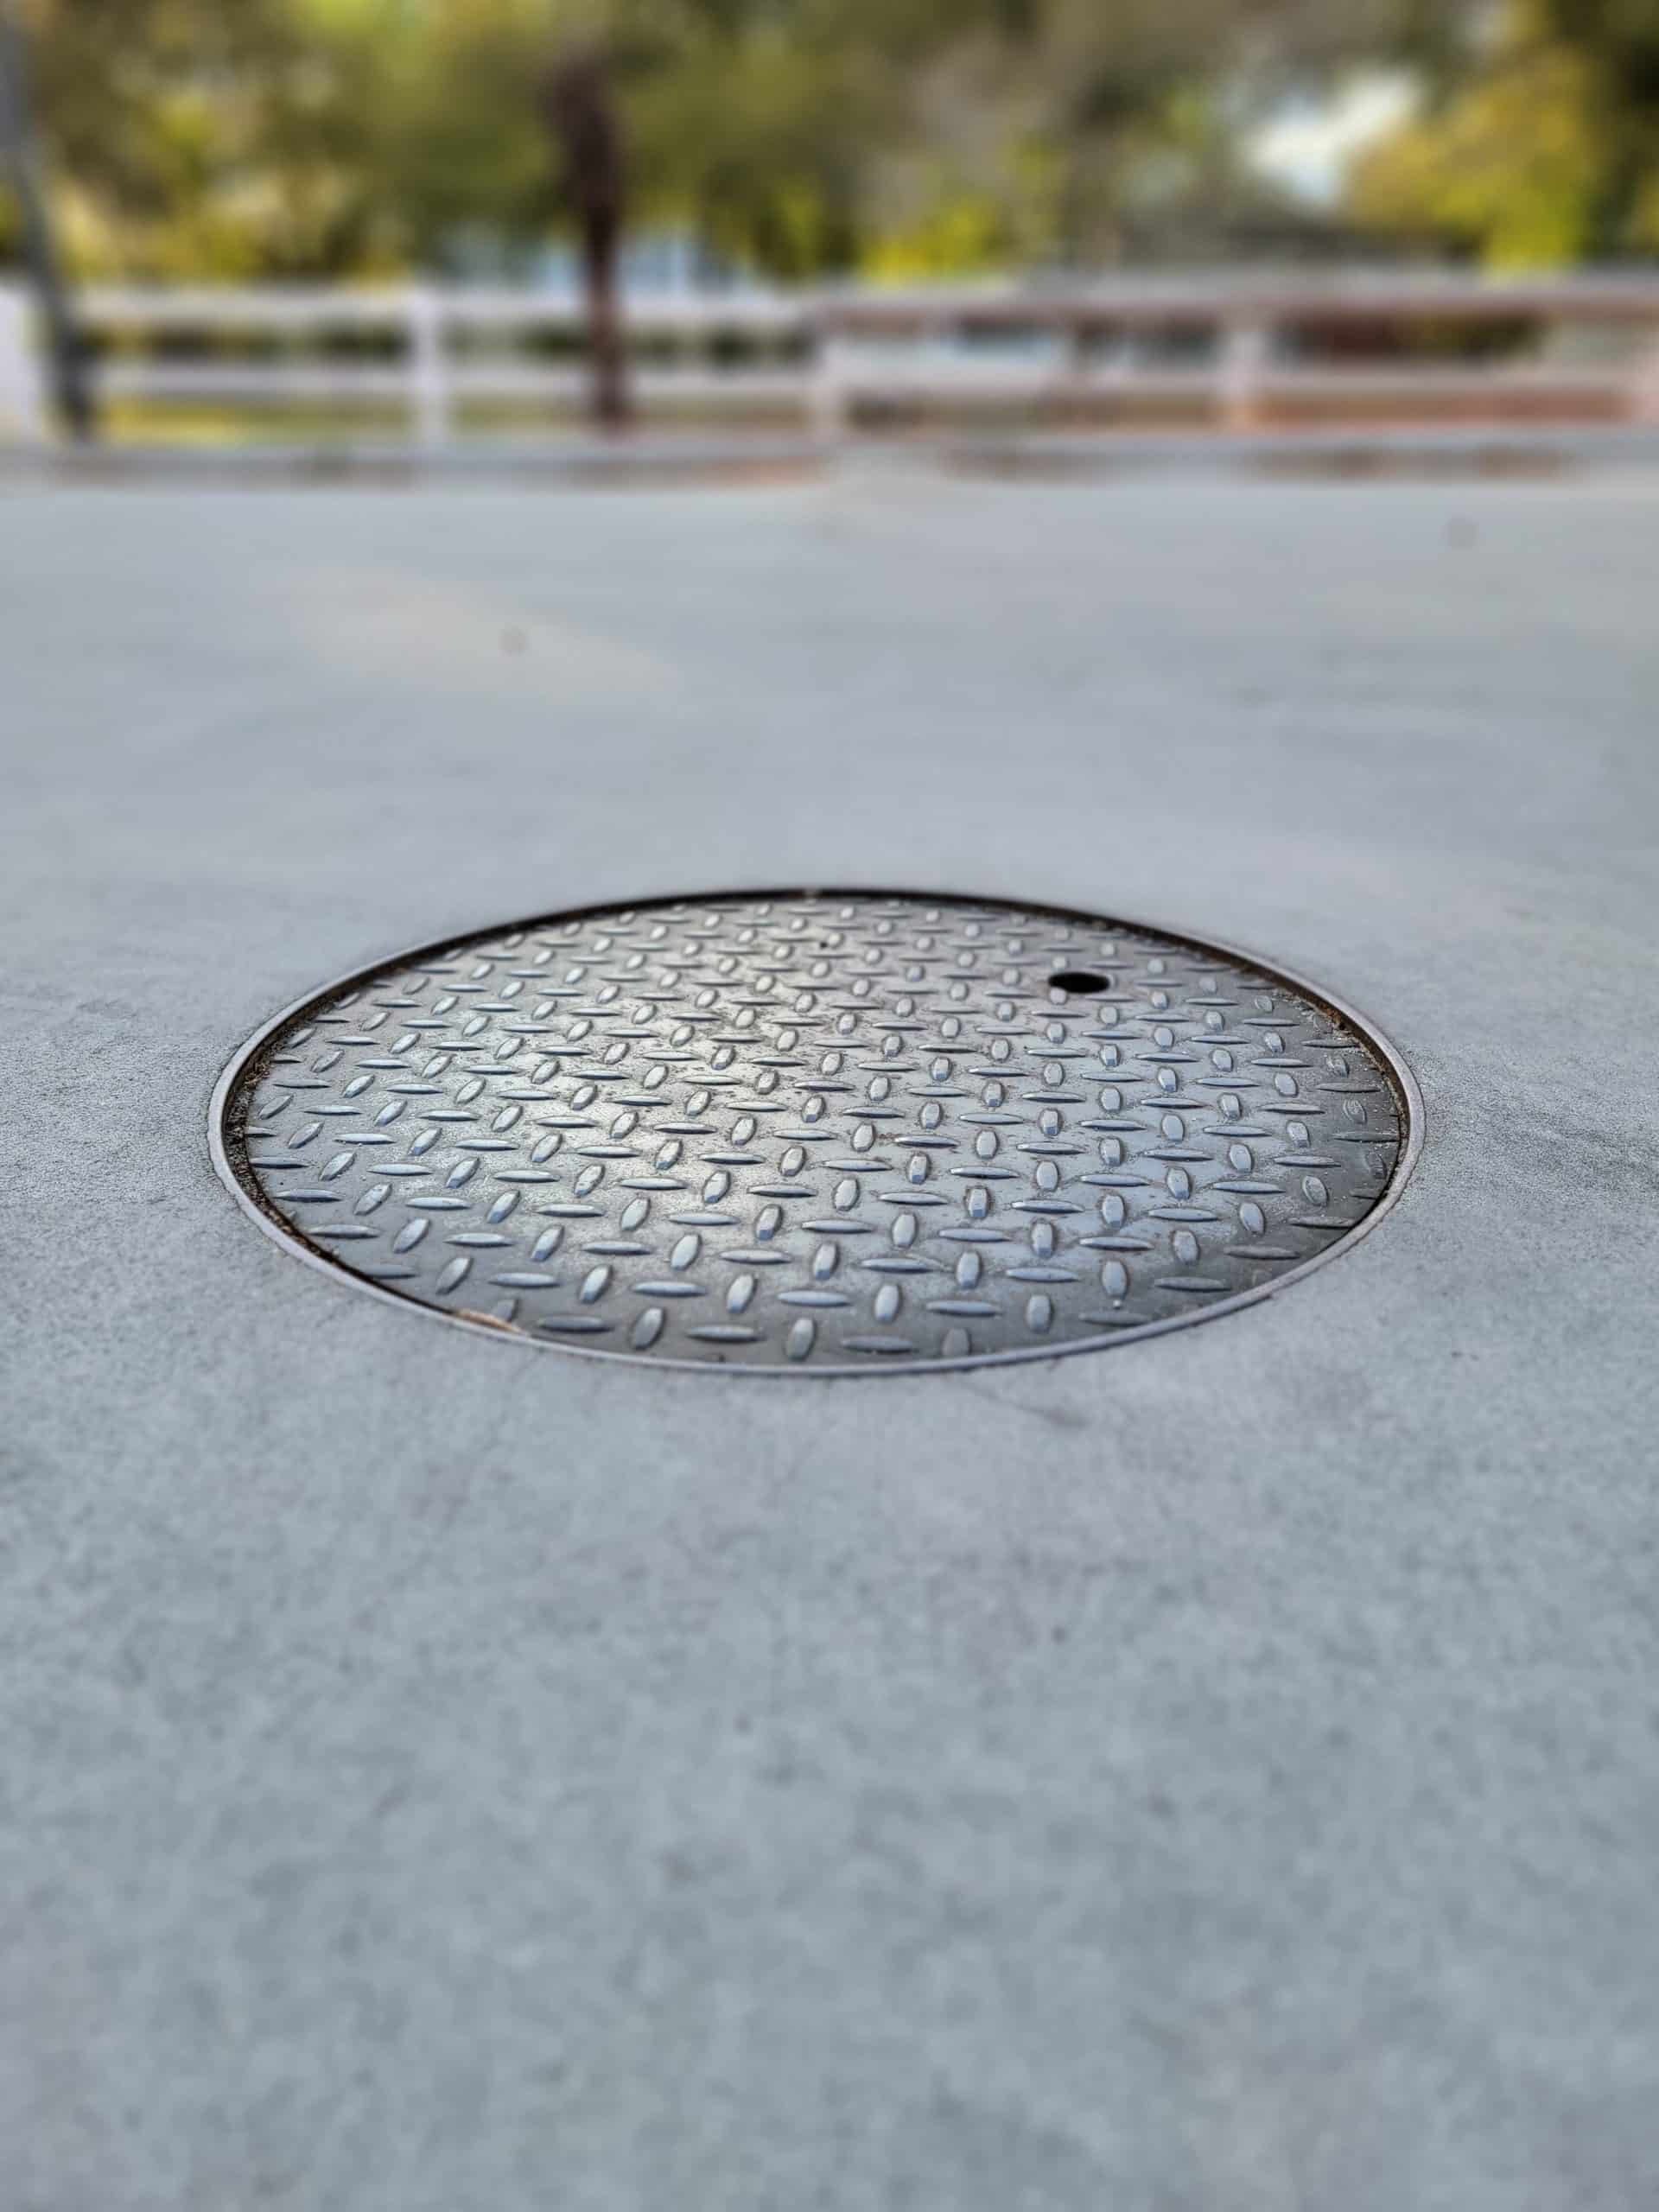 ROUND COVER IN PAVEMENT